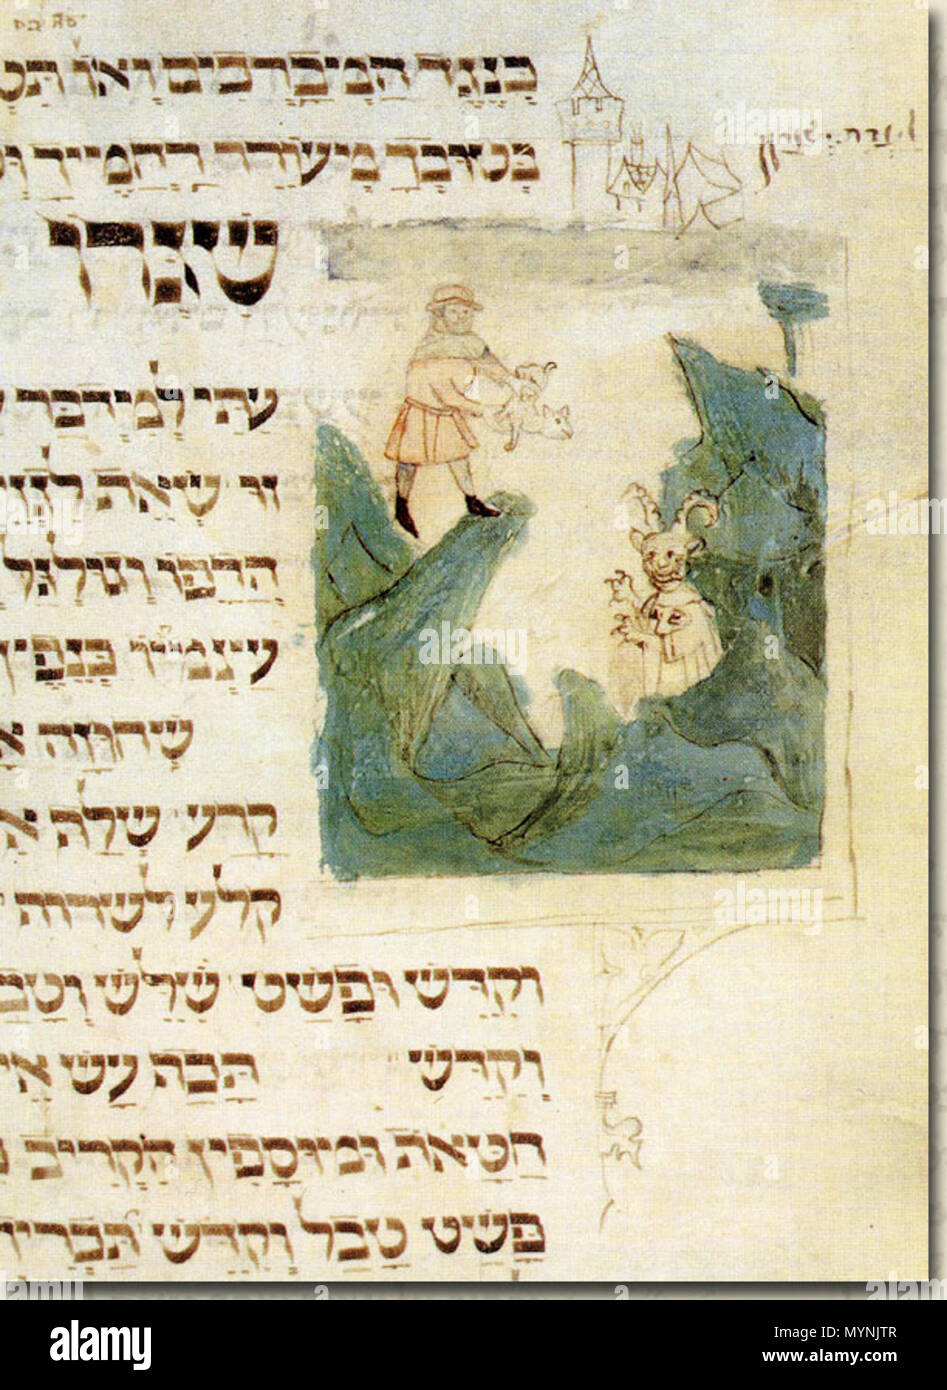 . English: In accordance with the tradition for the Day of Atonement (Yom Kippurim) in Leviticus 16:22, a scapegoat is cast from Mount Azazel into the abyss, to Azael, who appears as a horned and clawed mountain demon or devil. Illustration from a Machzor produced in Germany, perhaps Heilbronn, between 1370 and 1400 (MS Kaufmann A 387). 14th century. Unknown 254 Illustration-azazel Stock Photo